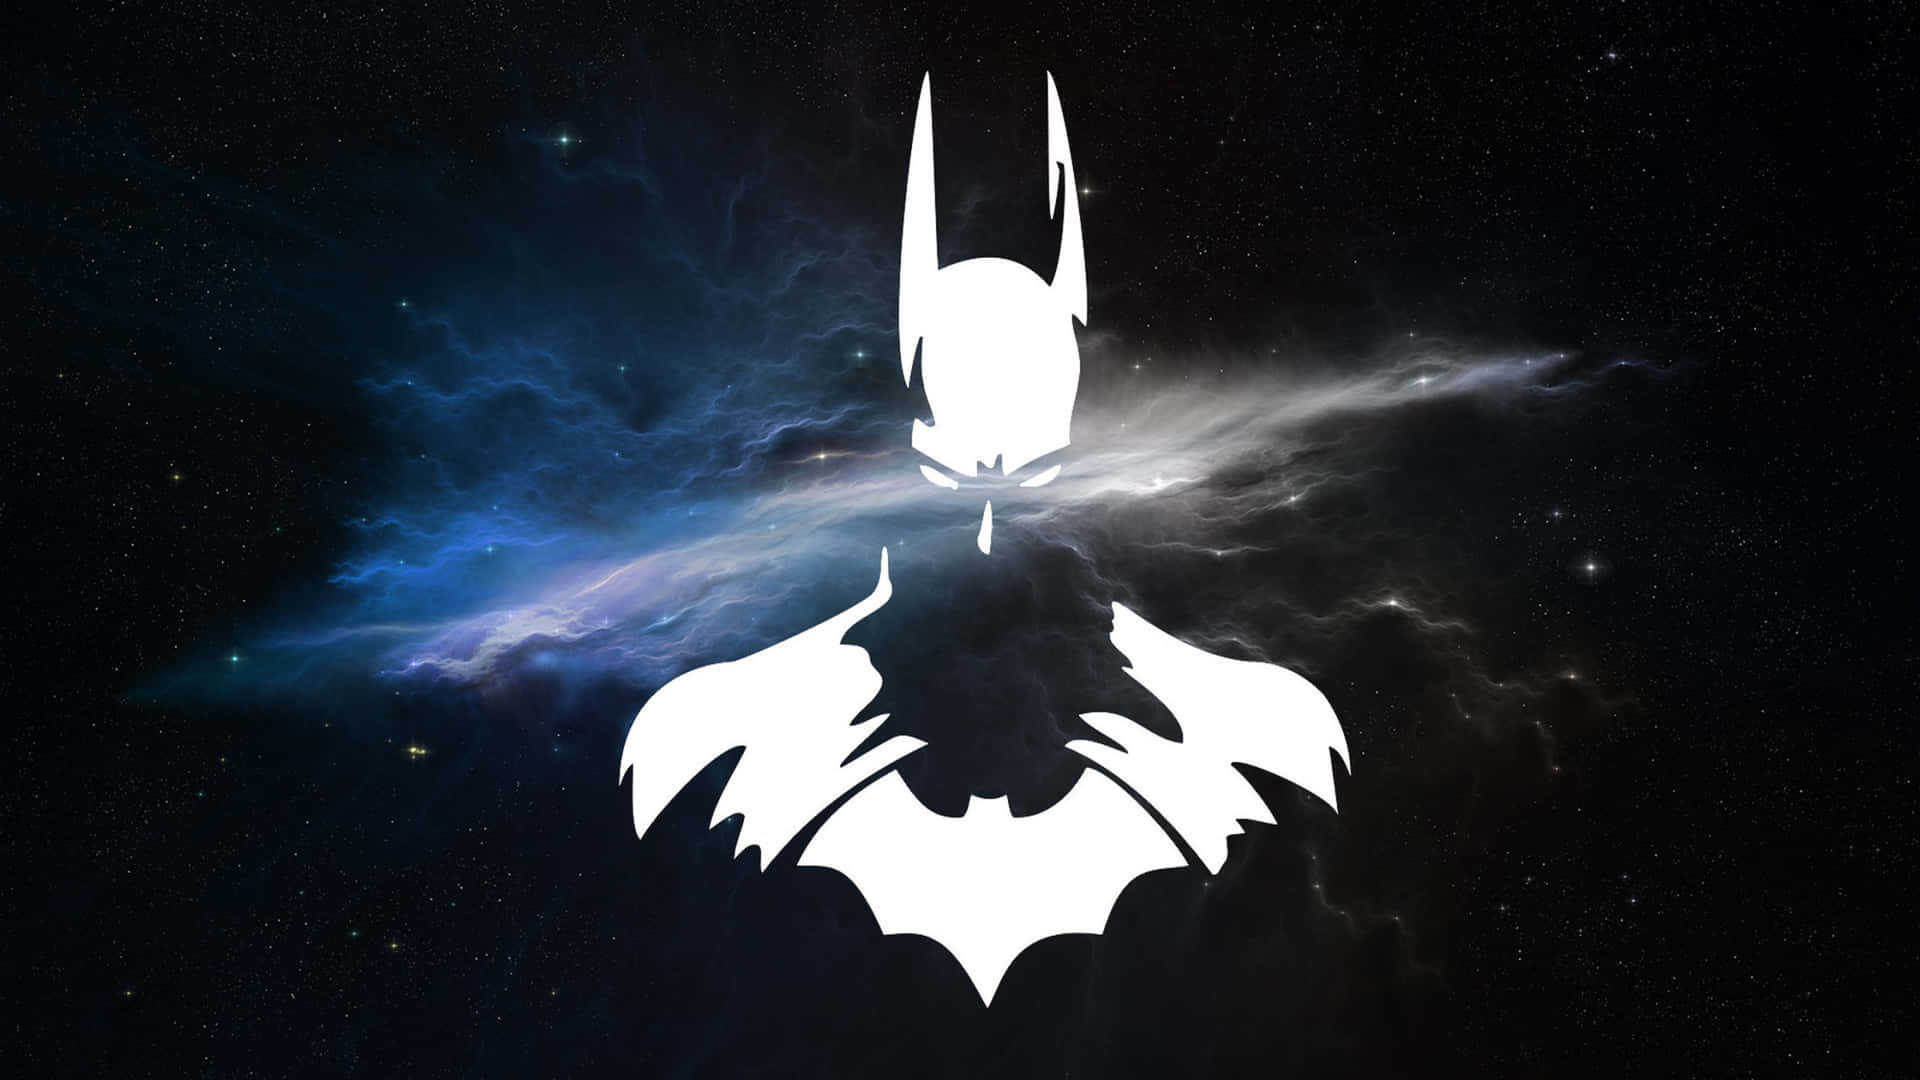 The Caped Crusader in all his glory Wallpaper